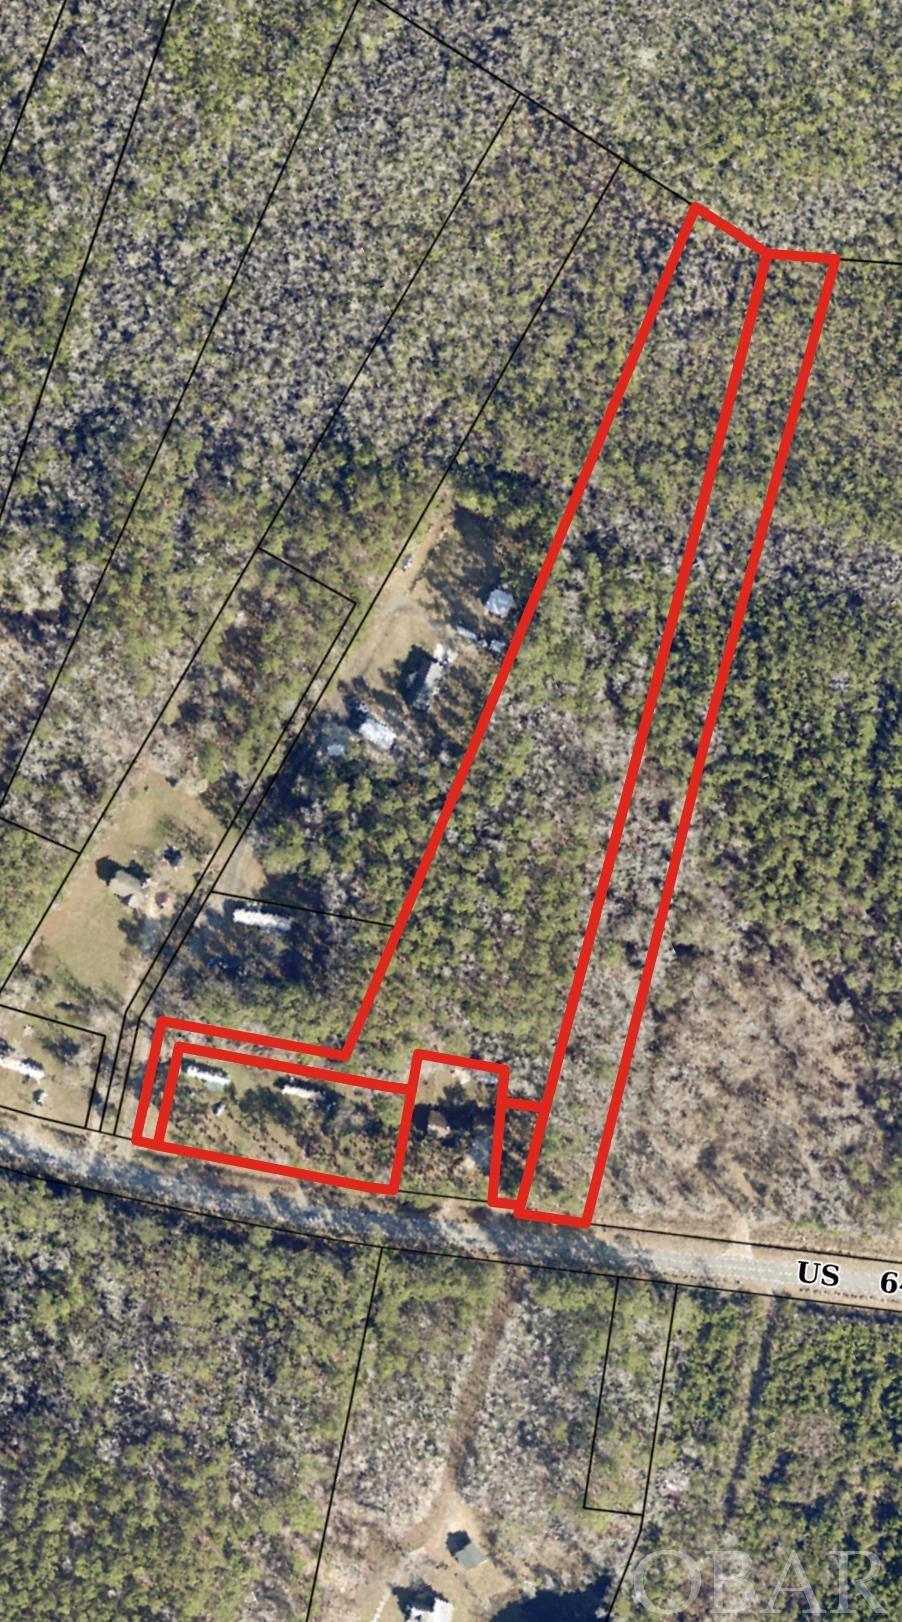 18528 Highway 64, East Lake, NC 27953, ,Lots/land,For sale,Highway 64,125219